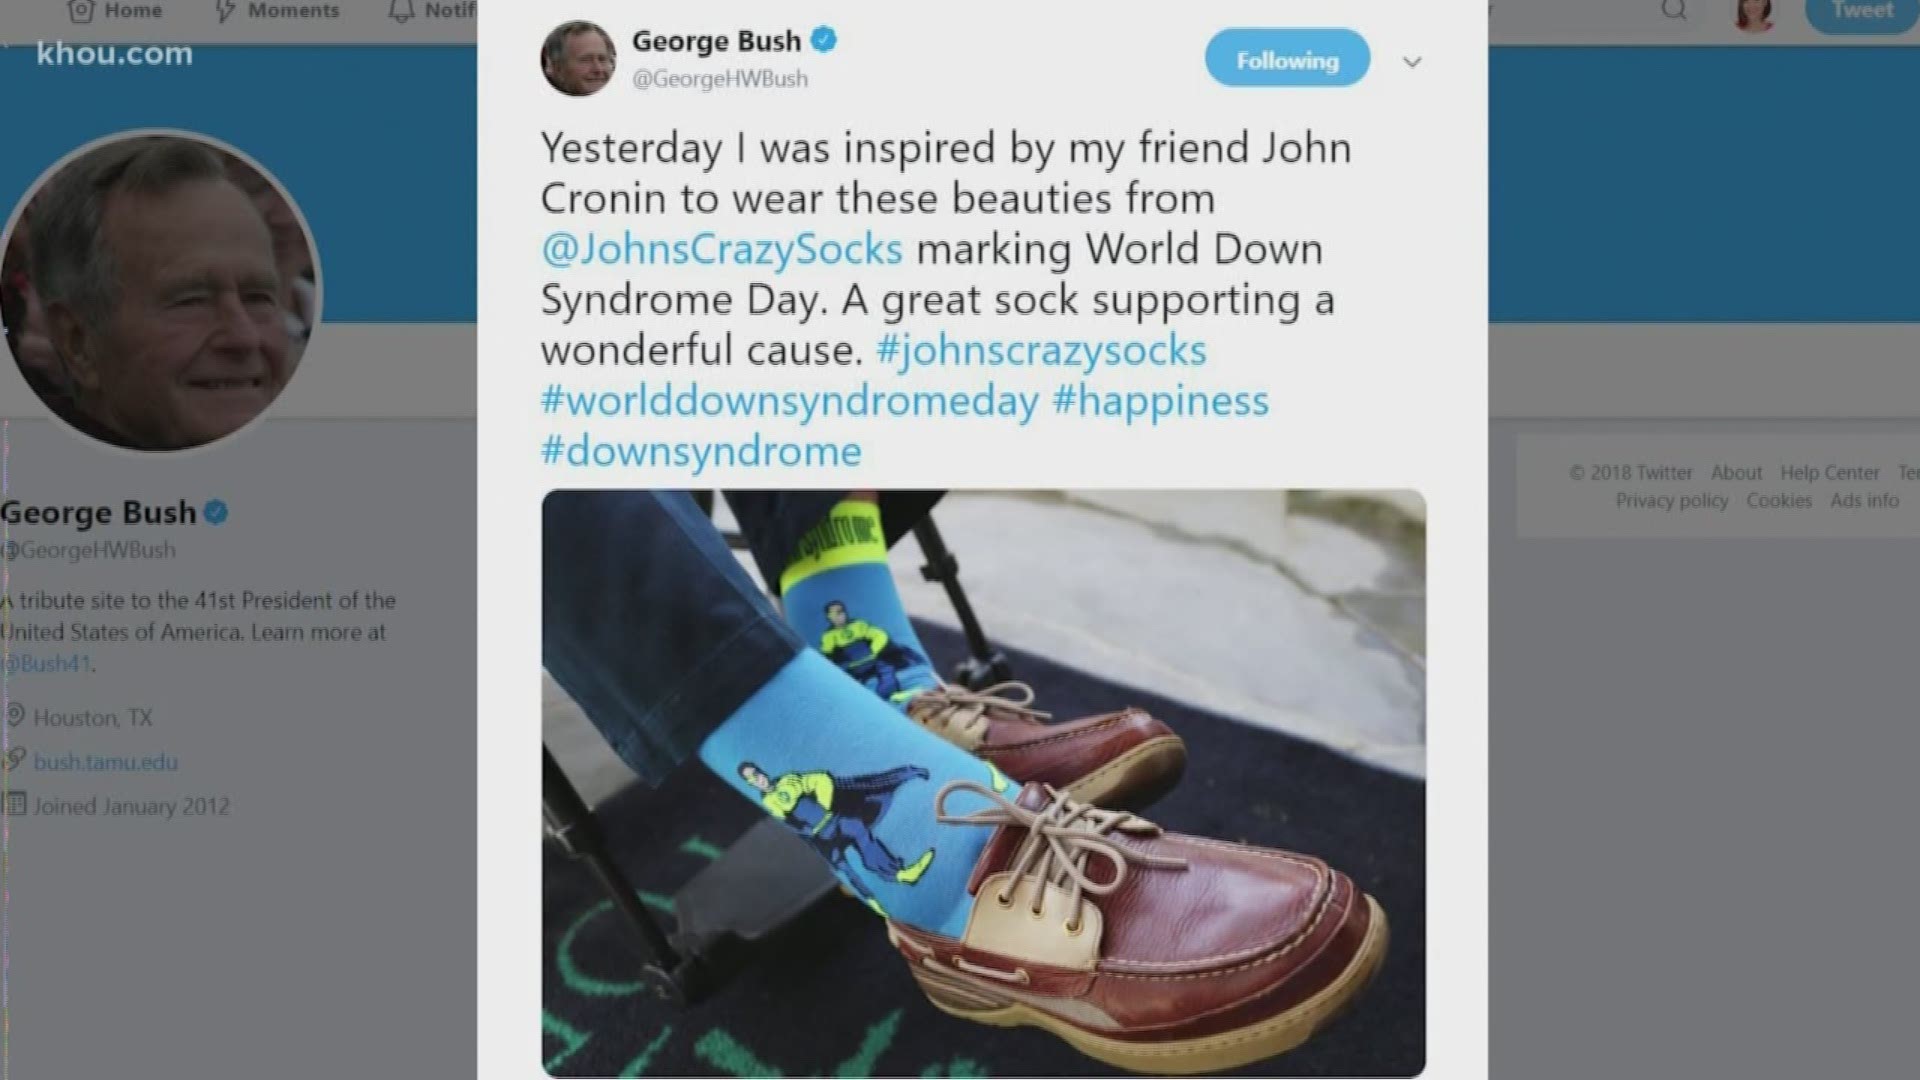 President George H.W. Bush was known for his love of colorful socks. That's how his friendship began with John Cronin, a young man from New York with Down syndrome.